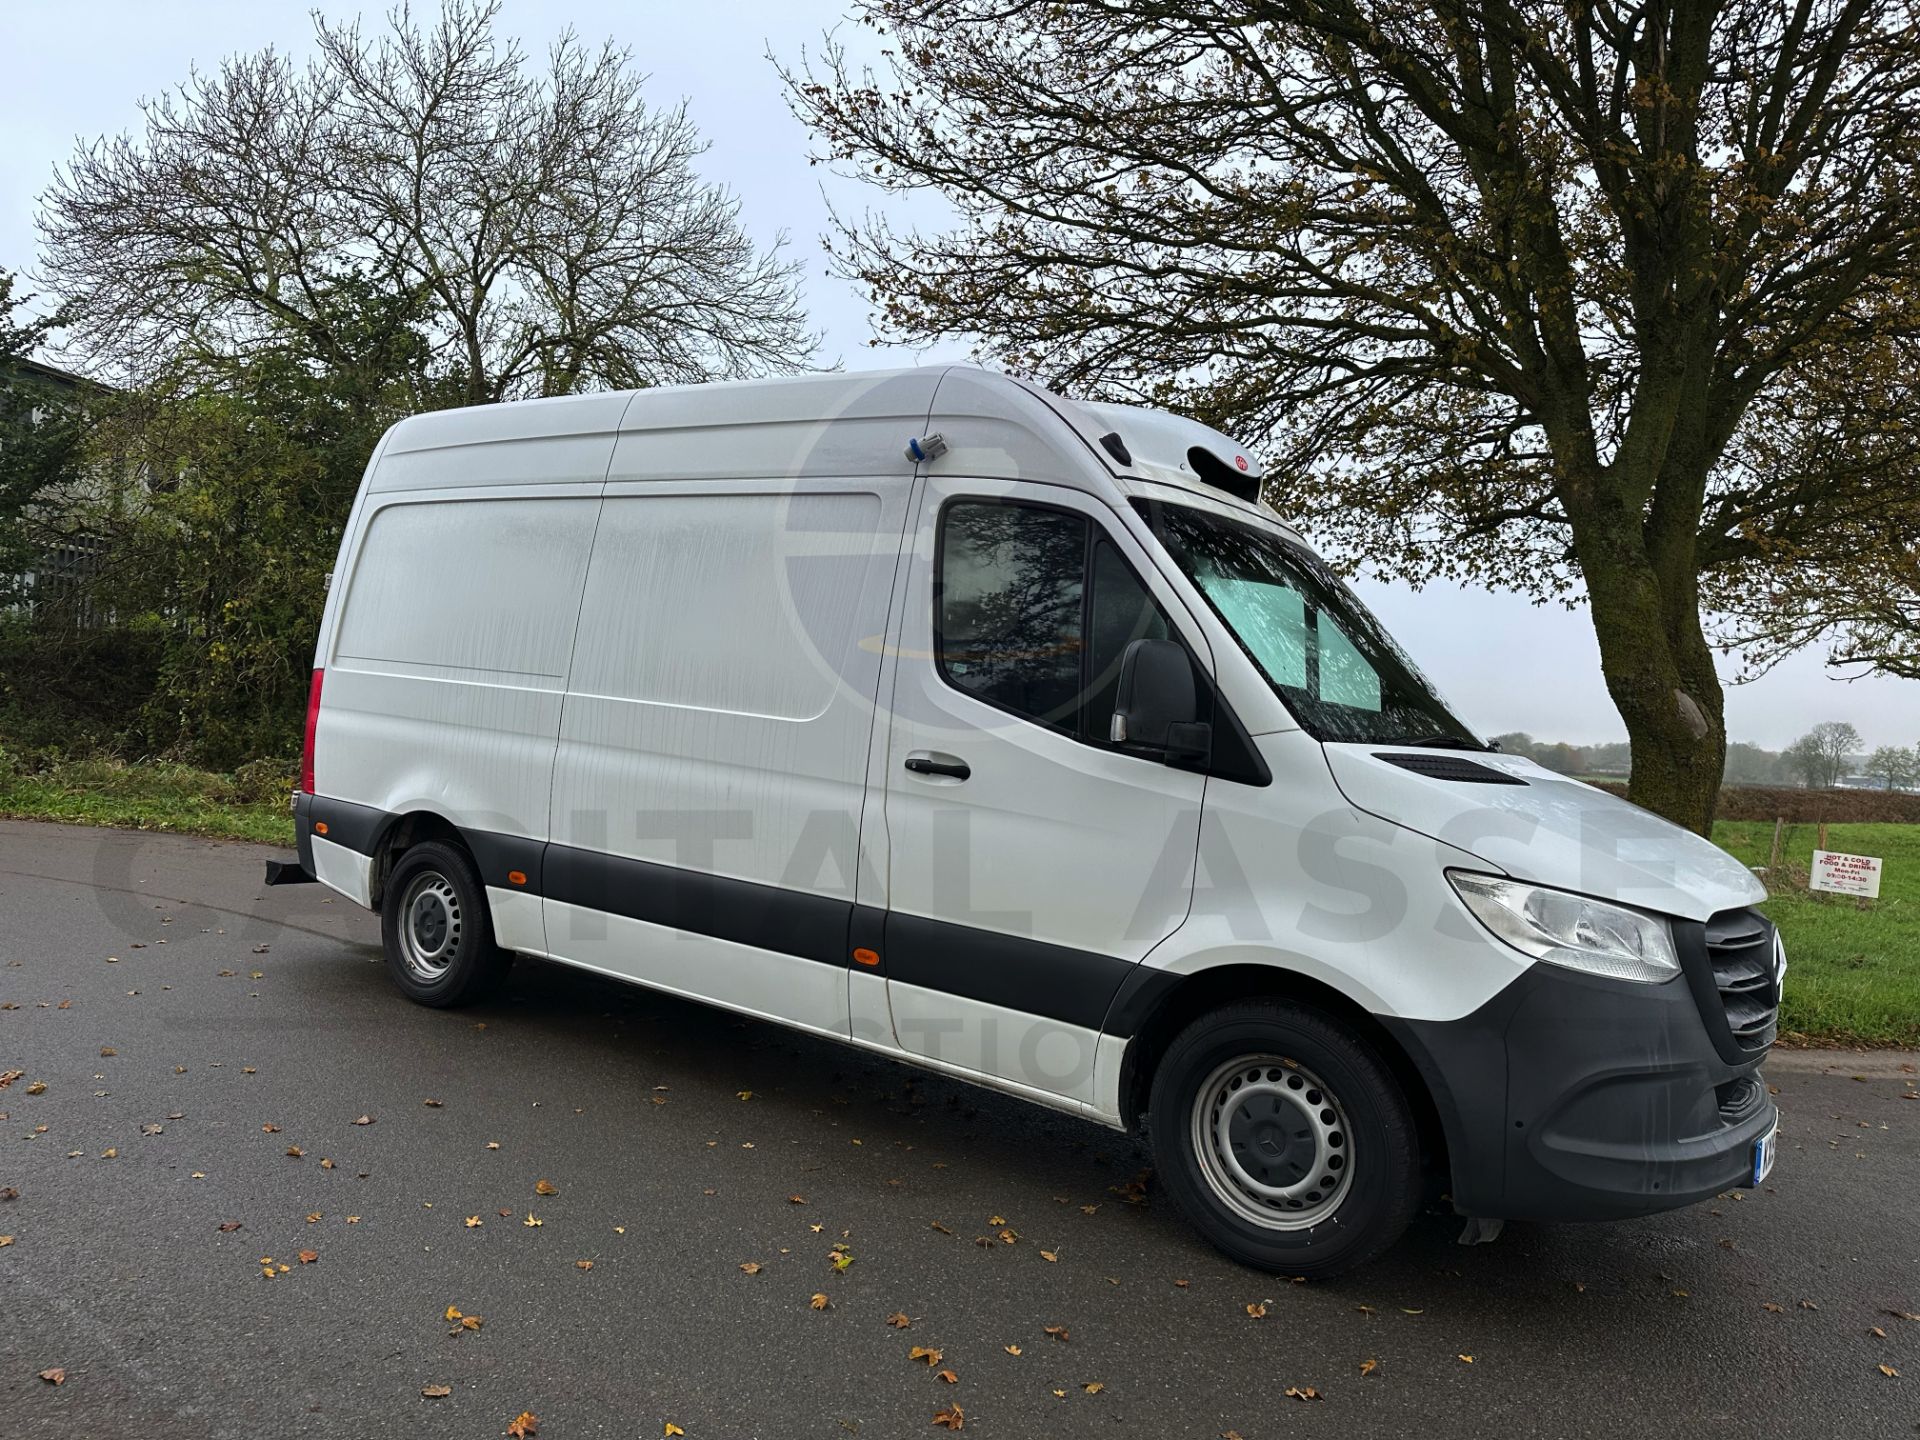 MERCEDES-BENZ SPRINTER 314 CDI *MWB - REFRIGERATED VAN* (2019 - FACELIFT MODEL) *OVERNIGHT STANDBY* - Image 2 of 45